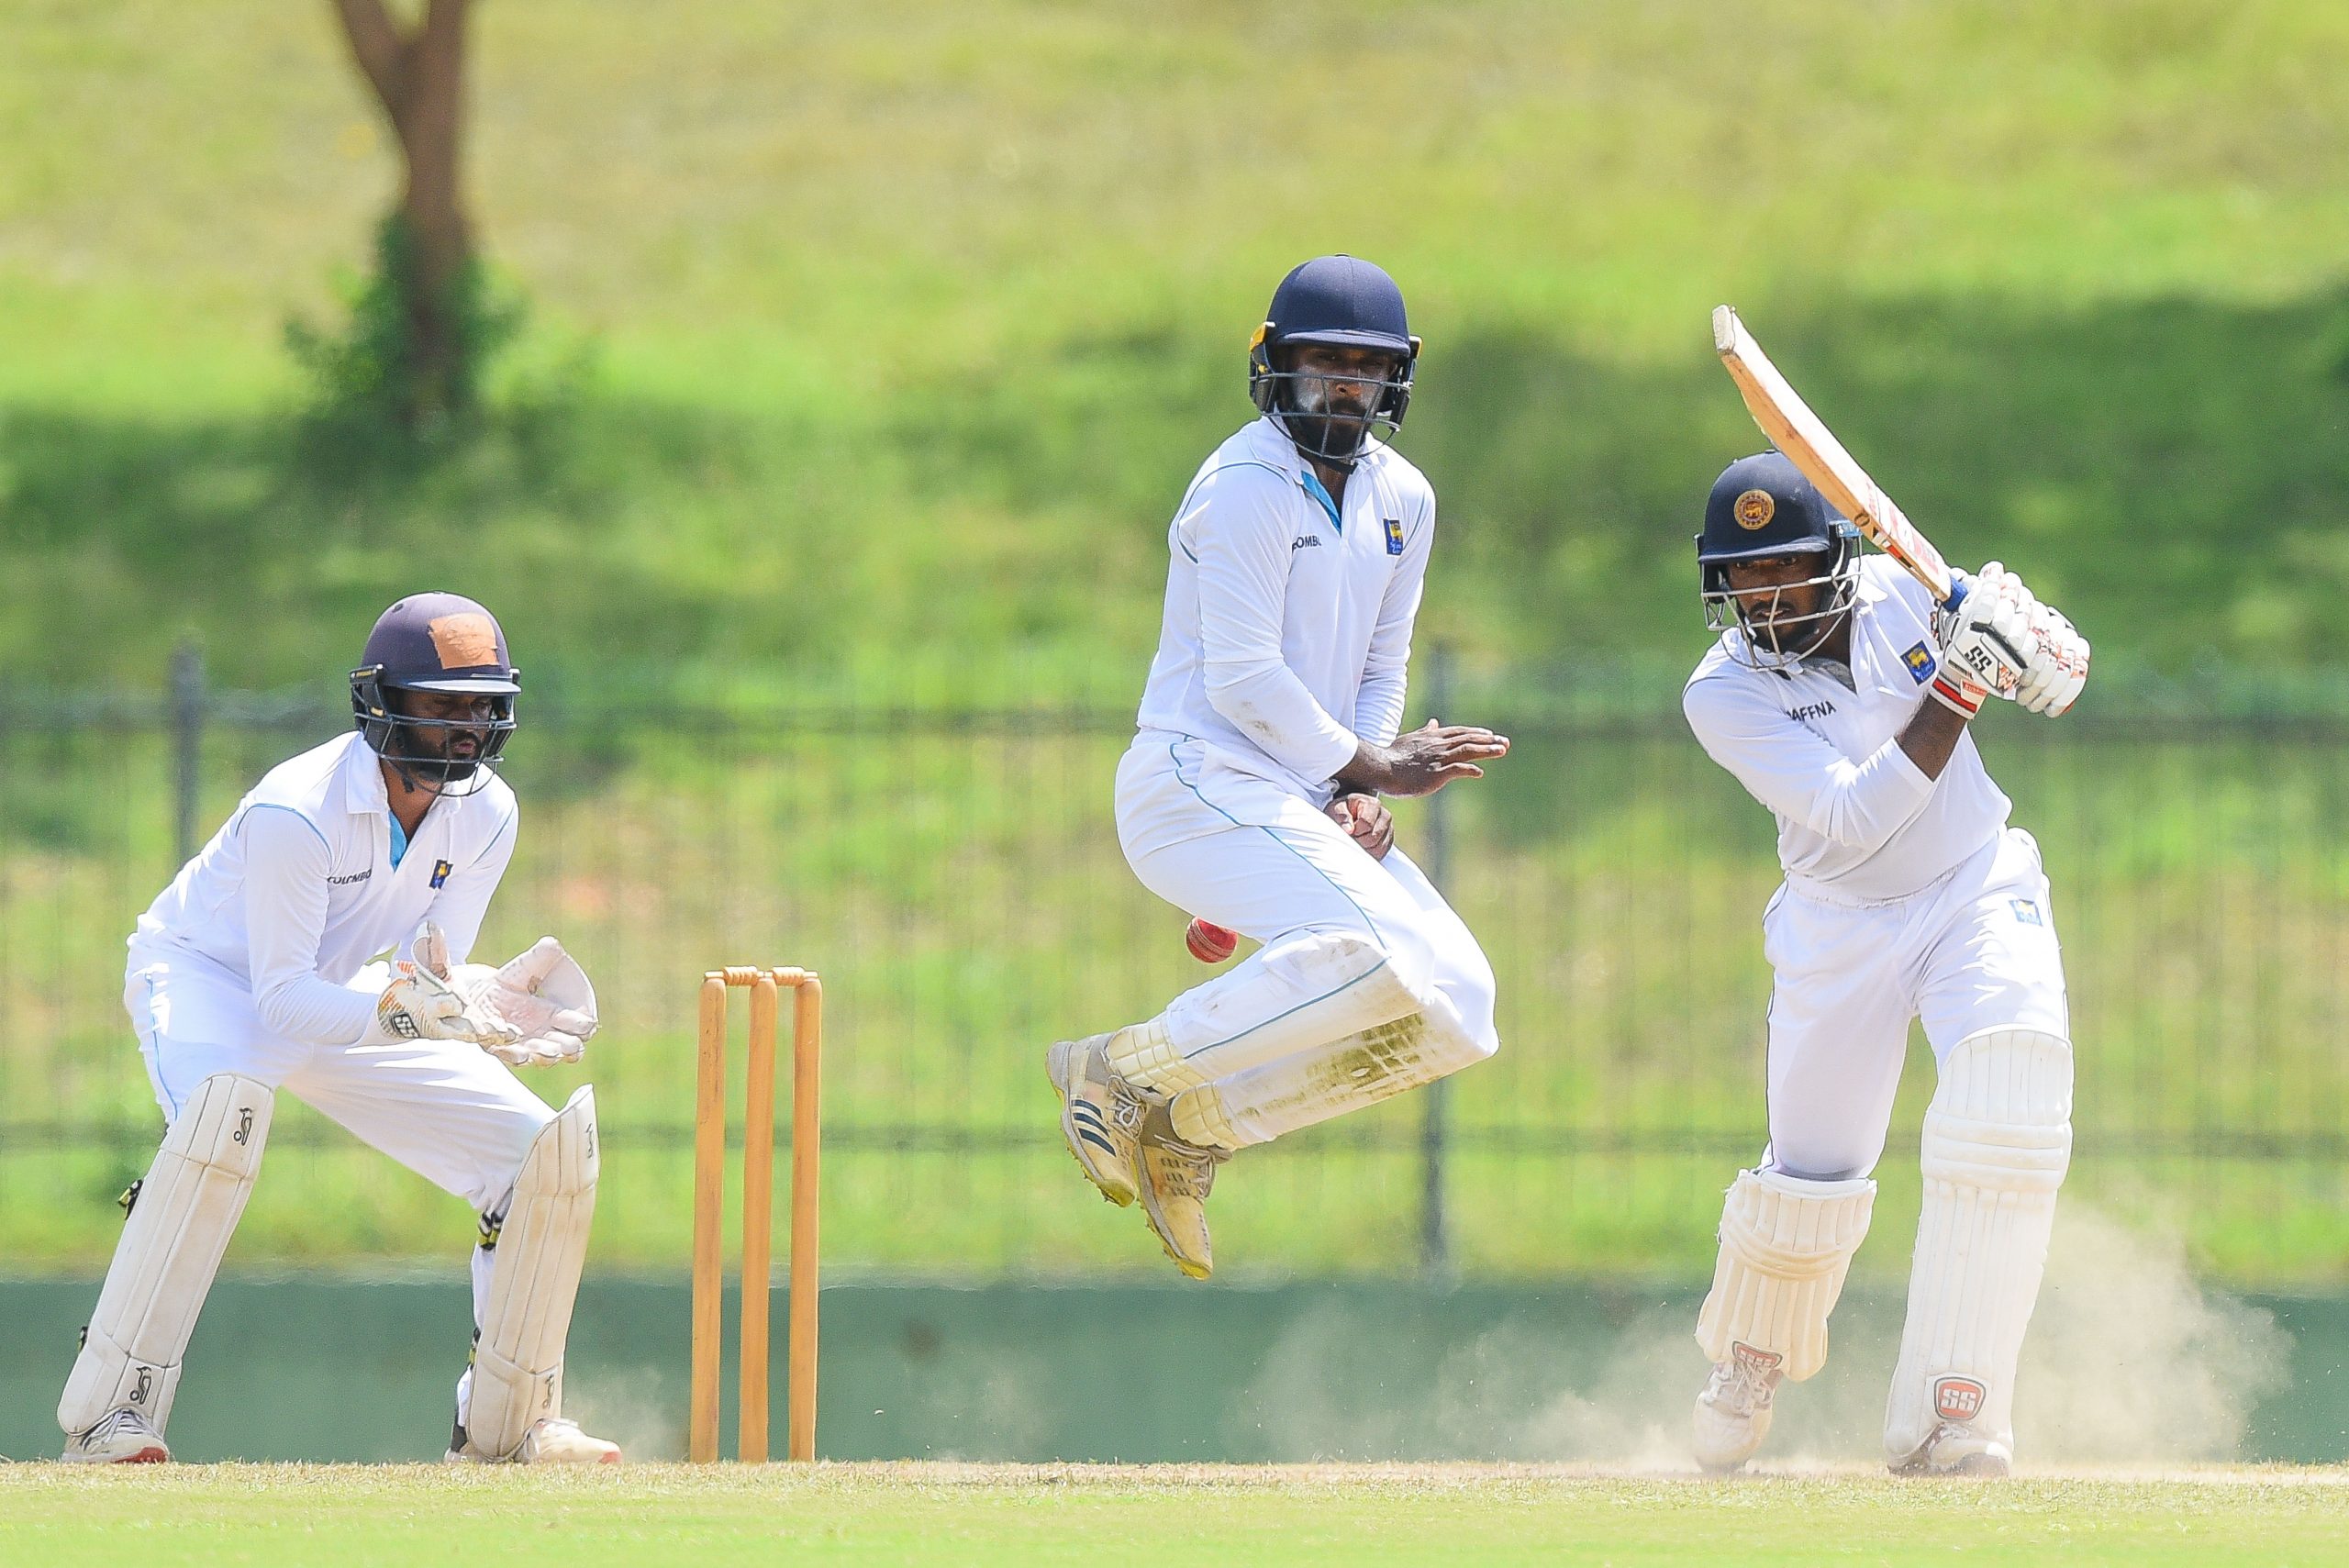 Jaffna and Kandy face off for cup stakes